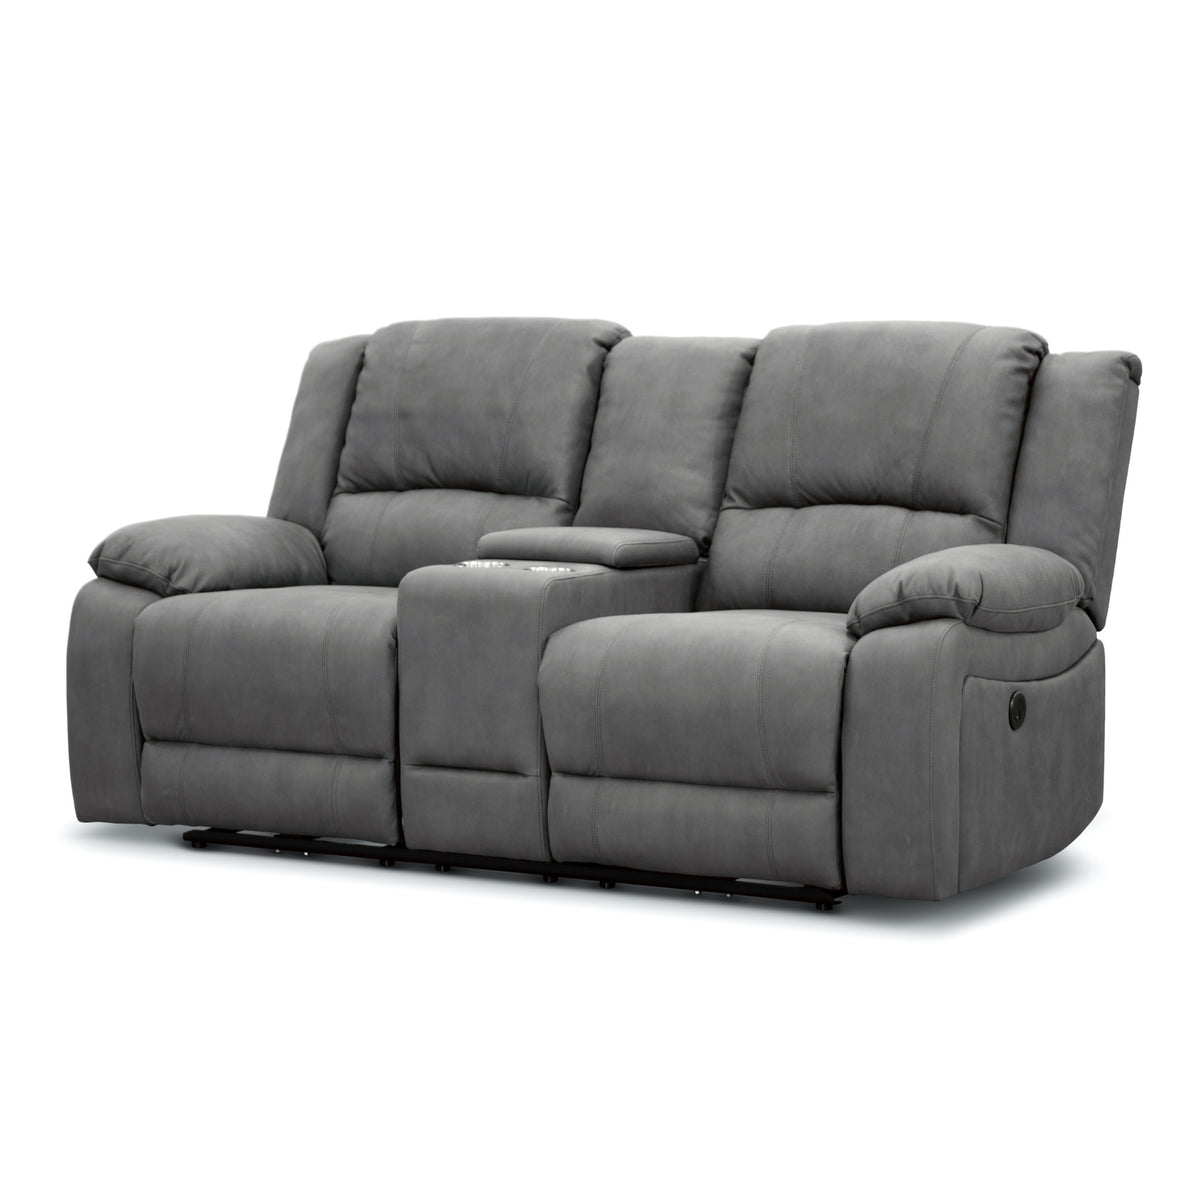 Anderson Fabric Electric Recliner Sofa Lounge Chair LATTE Light Grey 1 + 2 + 3 Seater